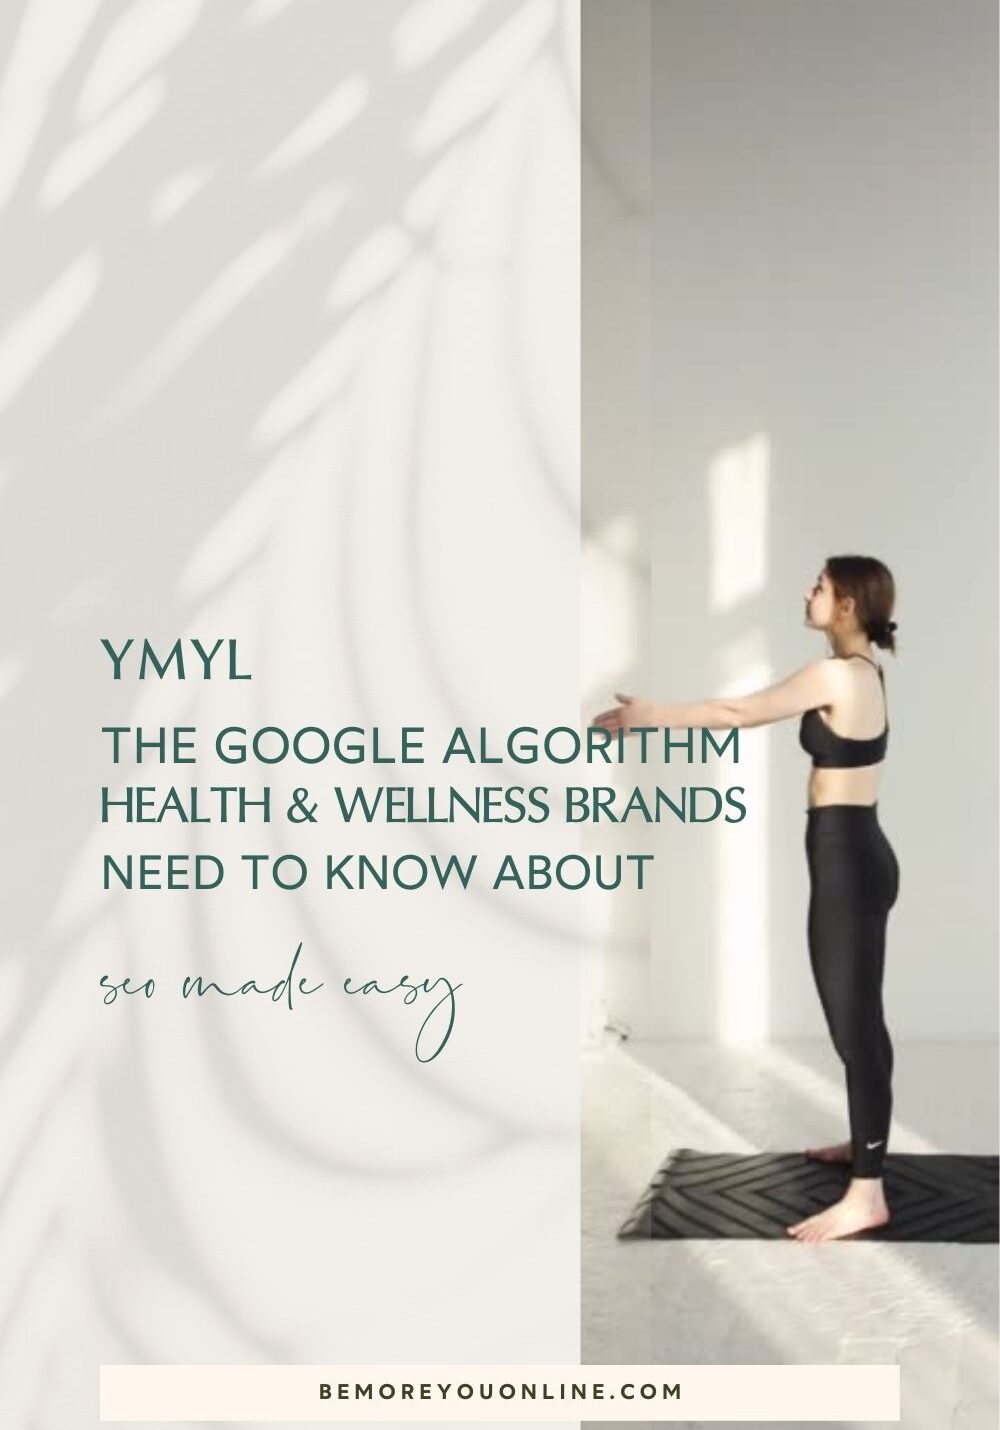 YMYL The Google algorithm health & wellness brands need to know about